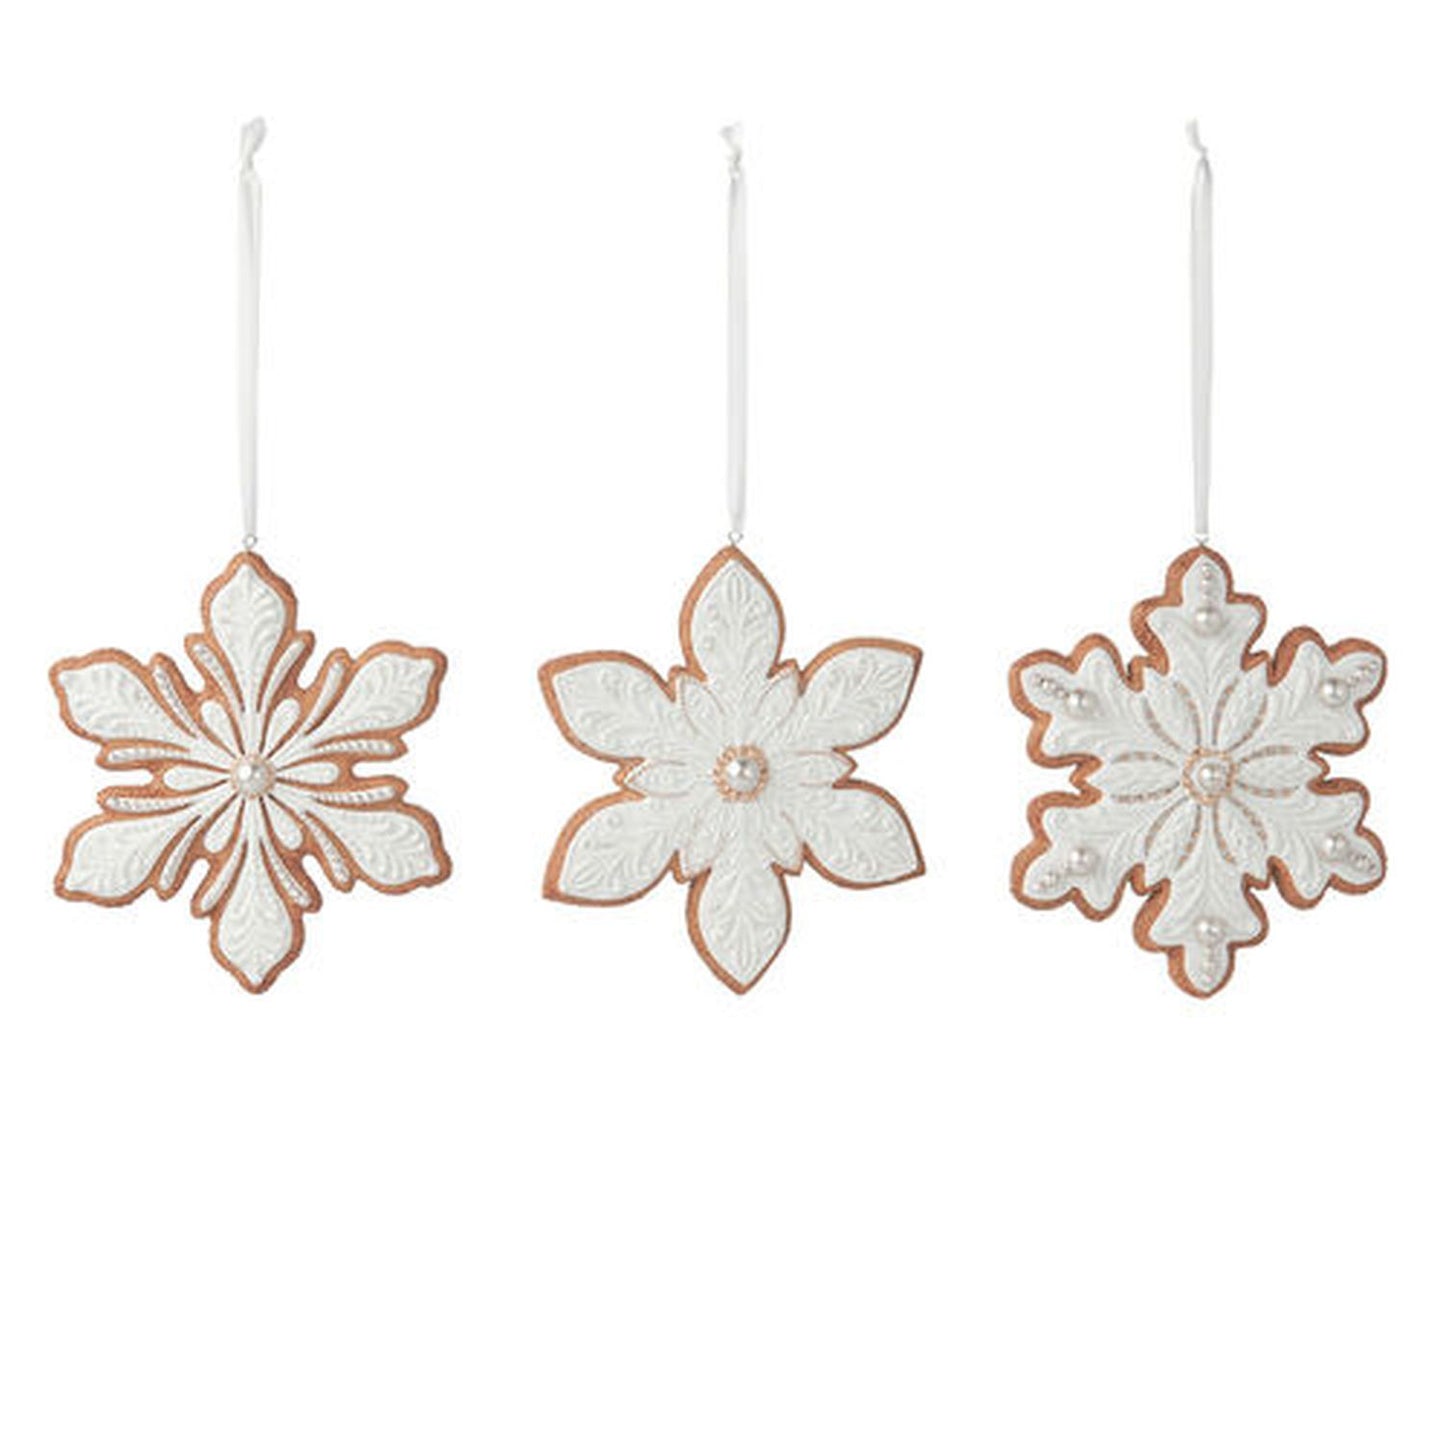 Gingerbread Village Set Of 3 Assortment Snowflake Cookie Ornaments